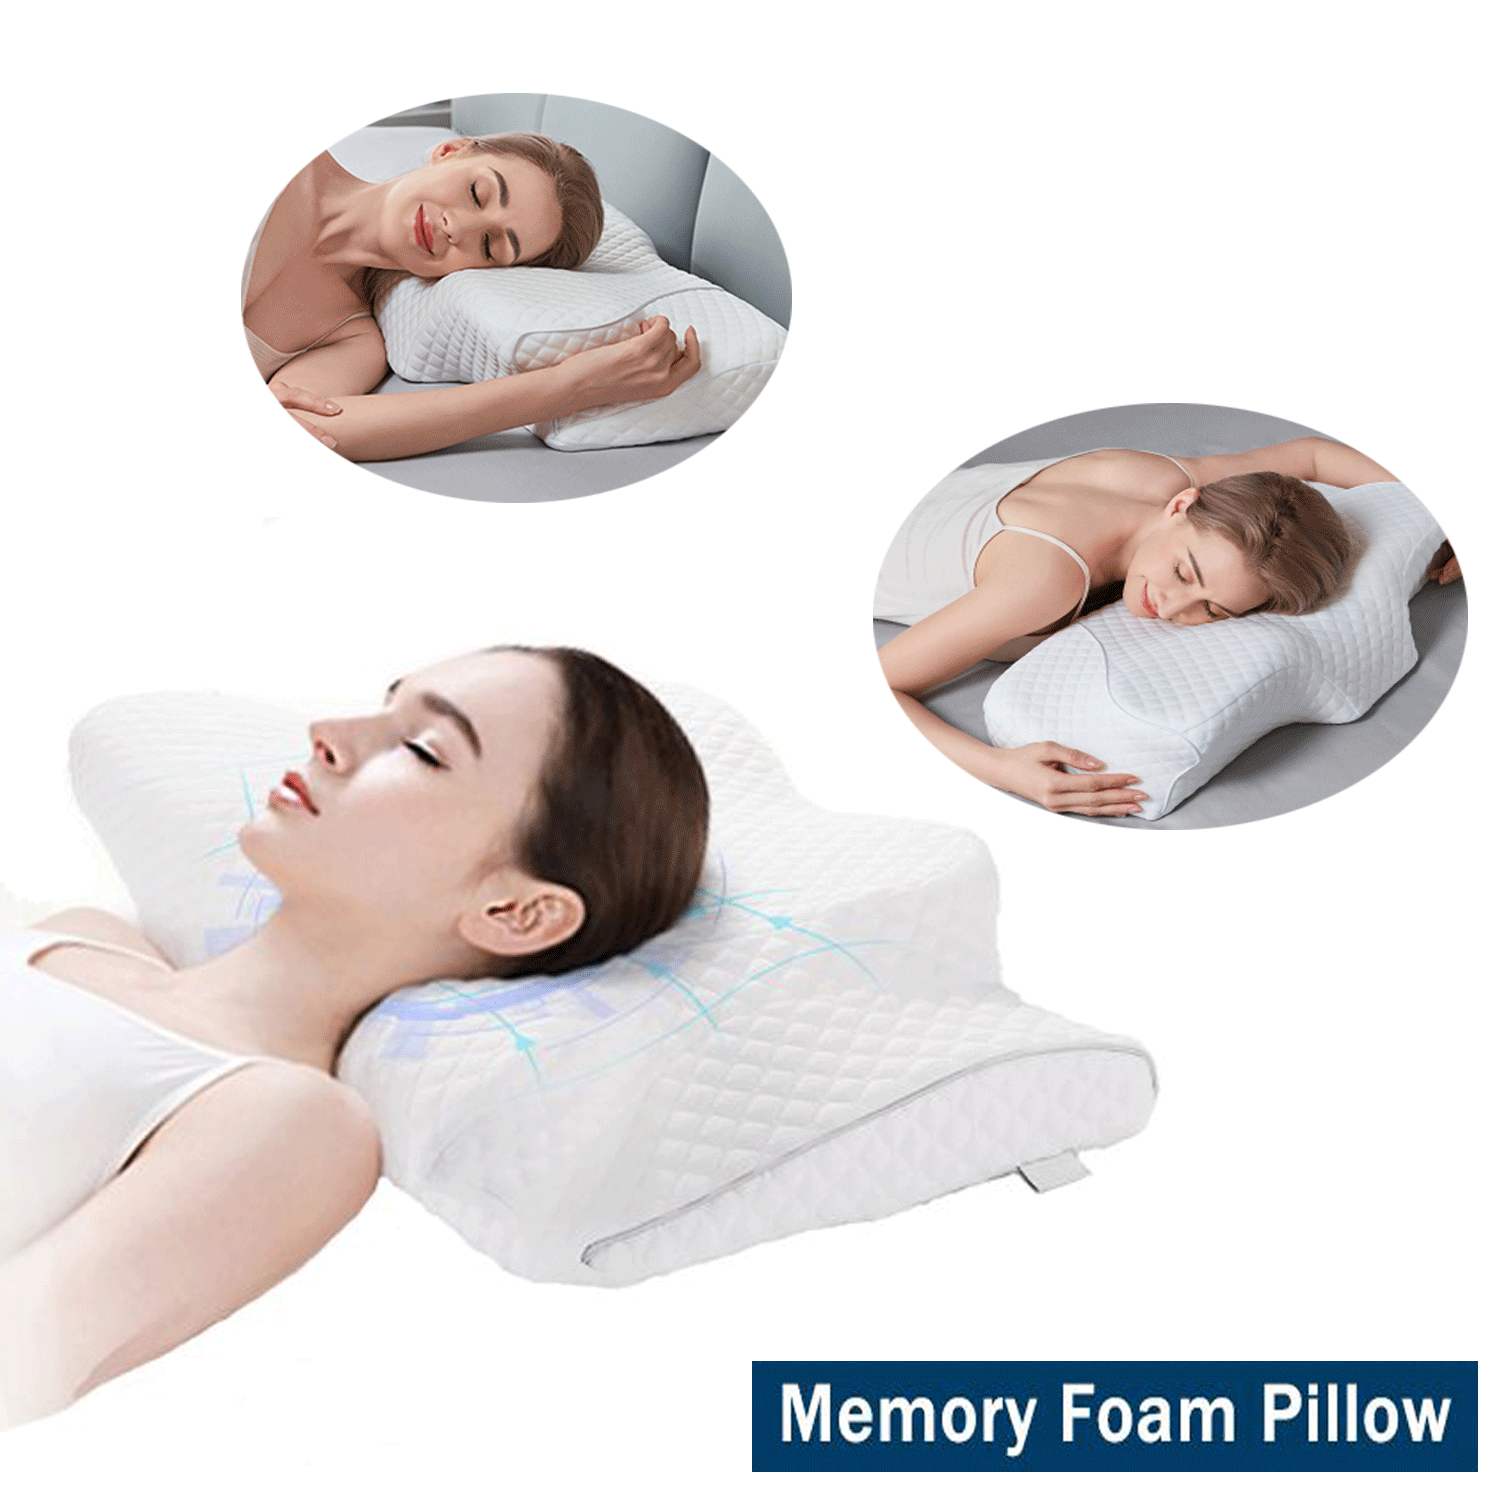 Cervical Memory Foam Pillow, Contour Memory Foam Pillows for Sleeping,Ergonomic Orthopedic Contour Support Pillow for Side Sleepers, Back and Stomach Sleepers